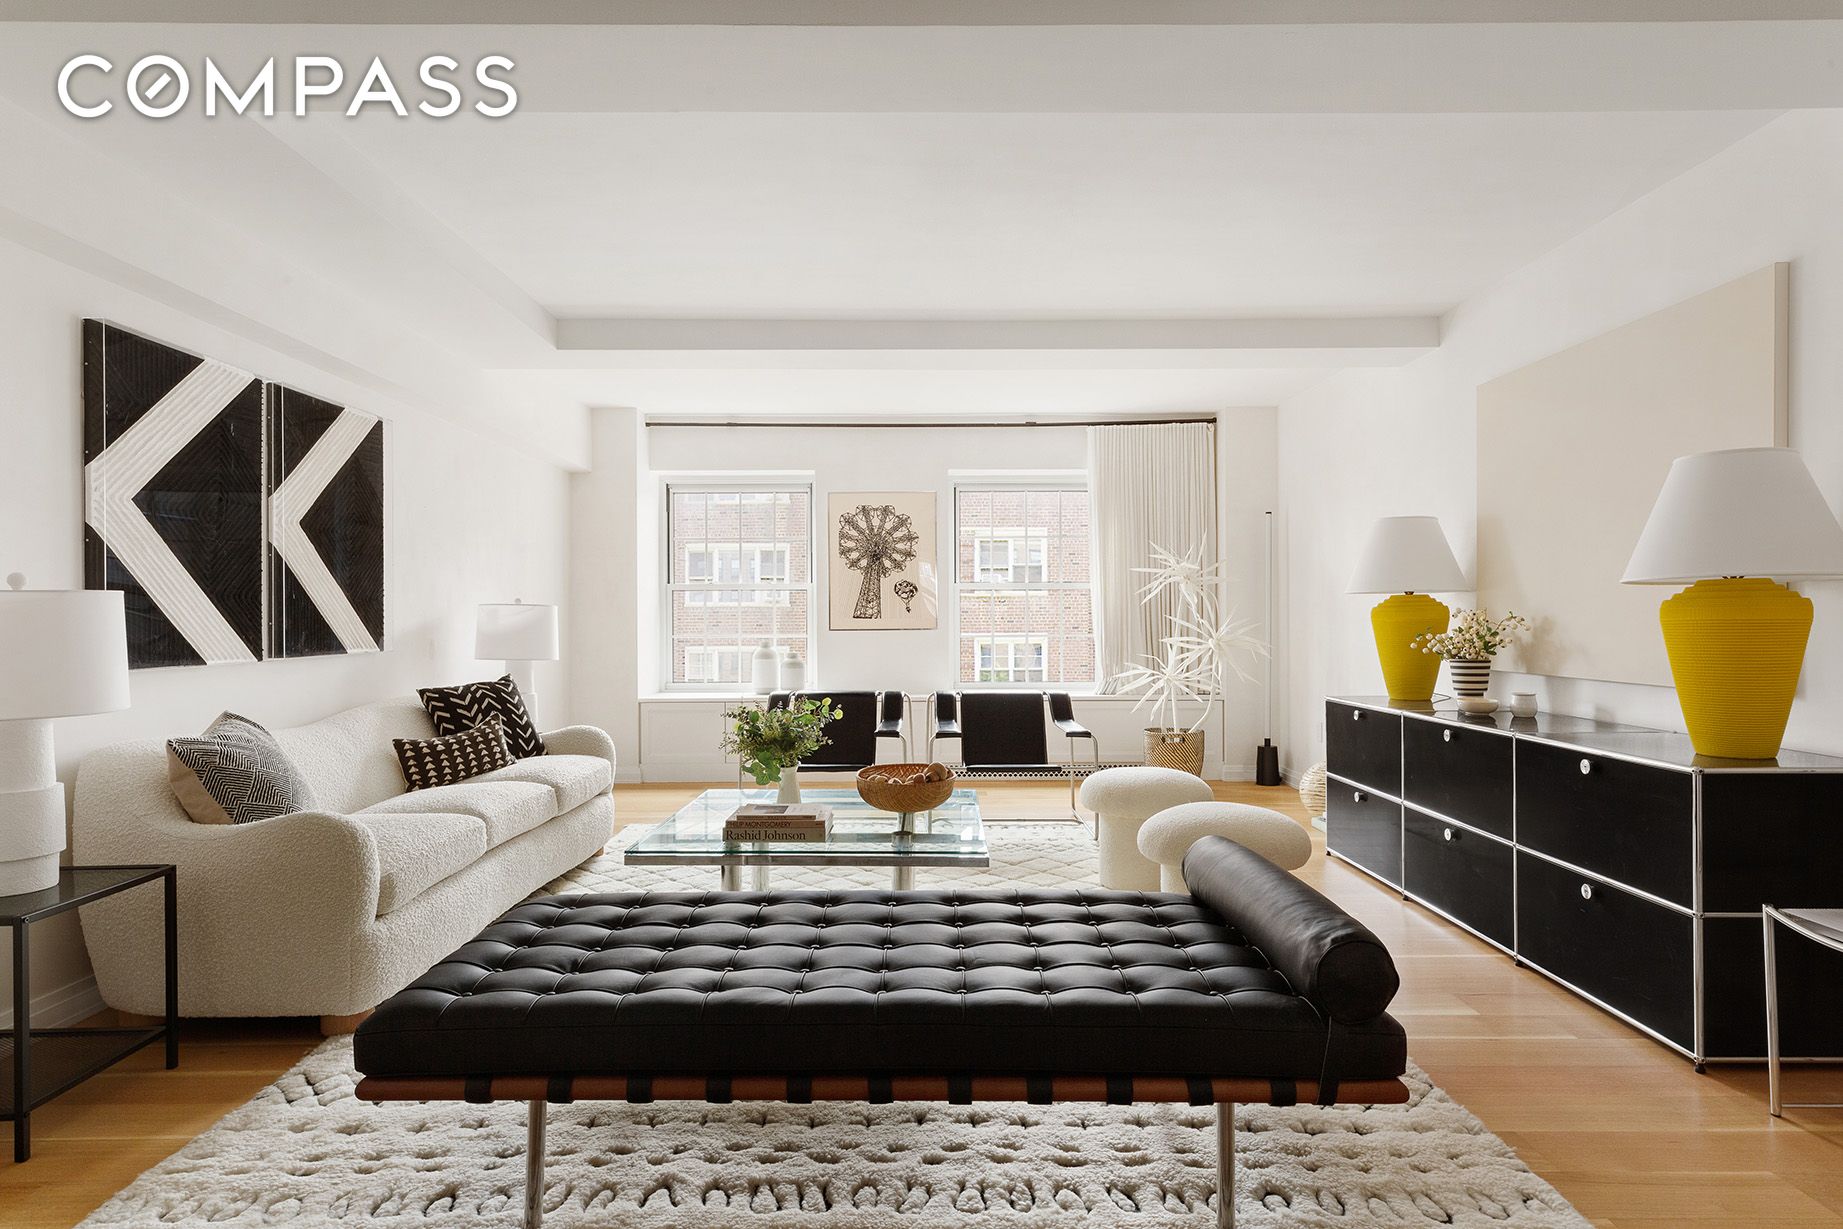 12 East 88th Street 8A, Upper East Side, Upper East Side, NYC - 4 Bedrooms  
4.5 Bathrooms  
7 Rooms - 